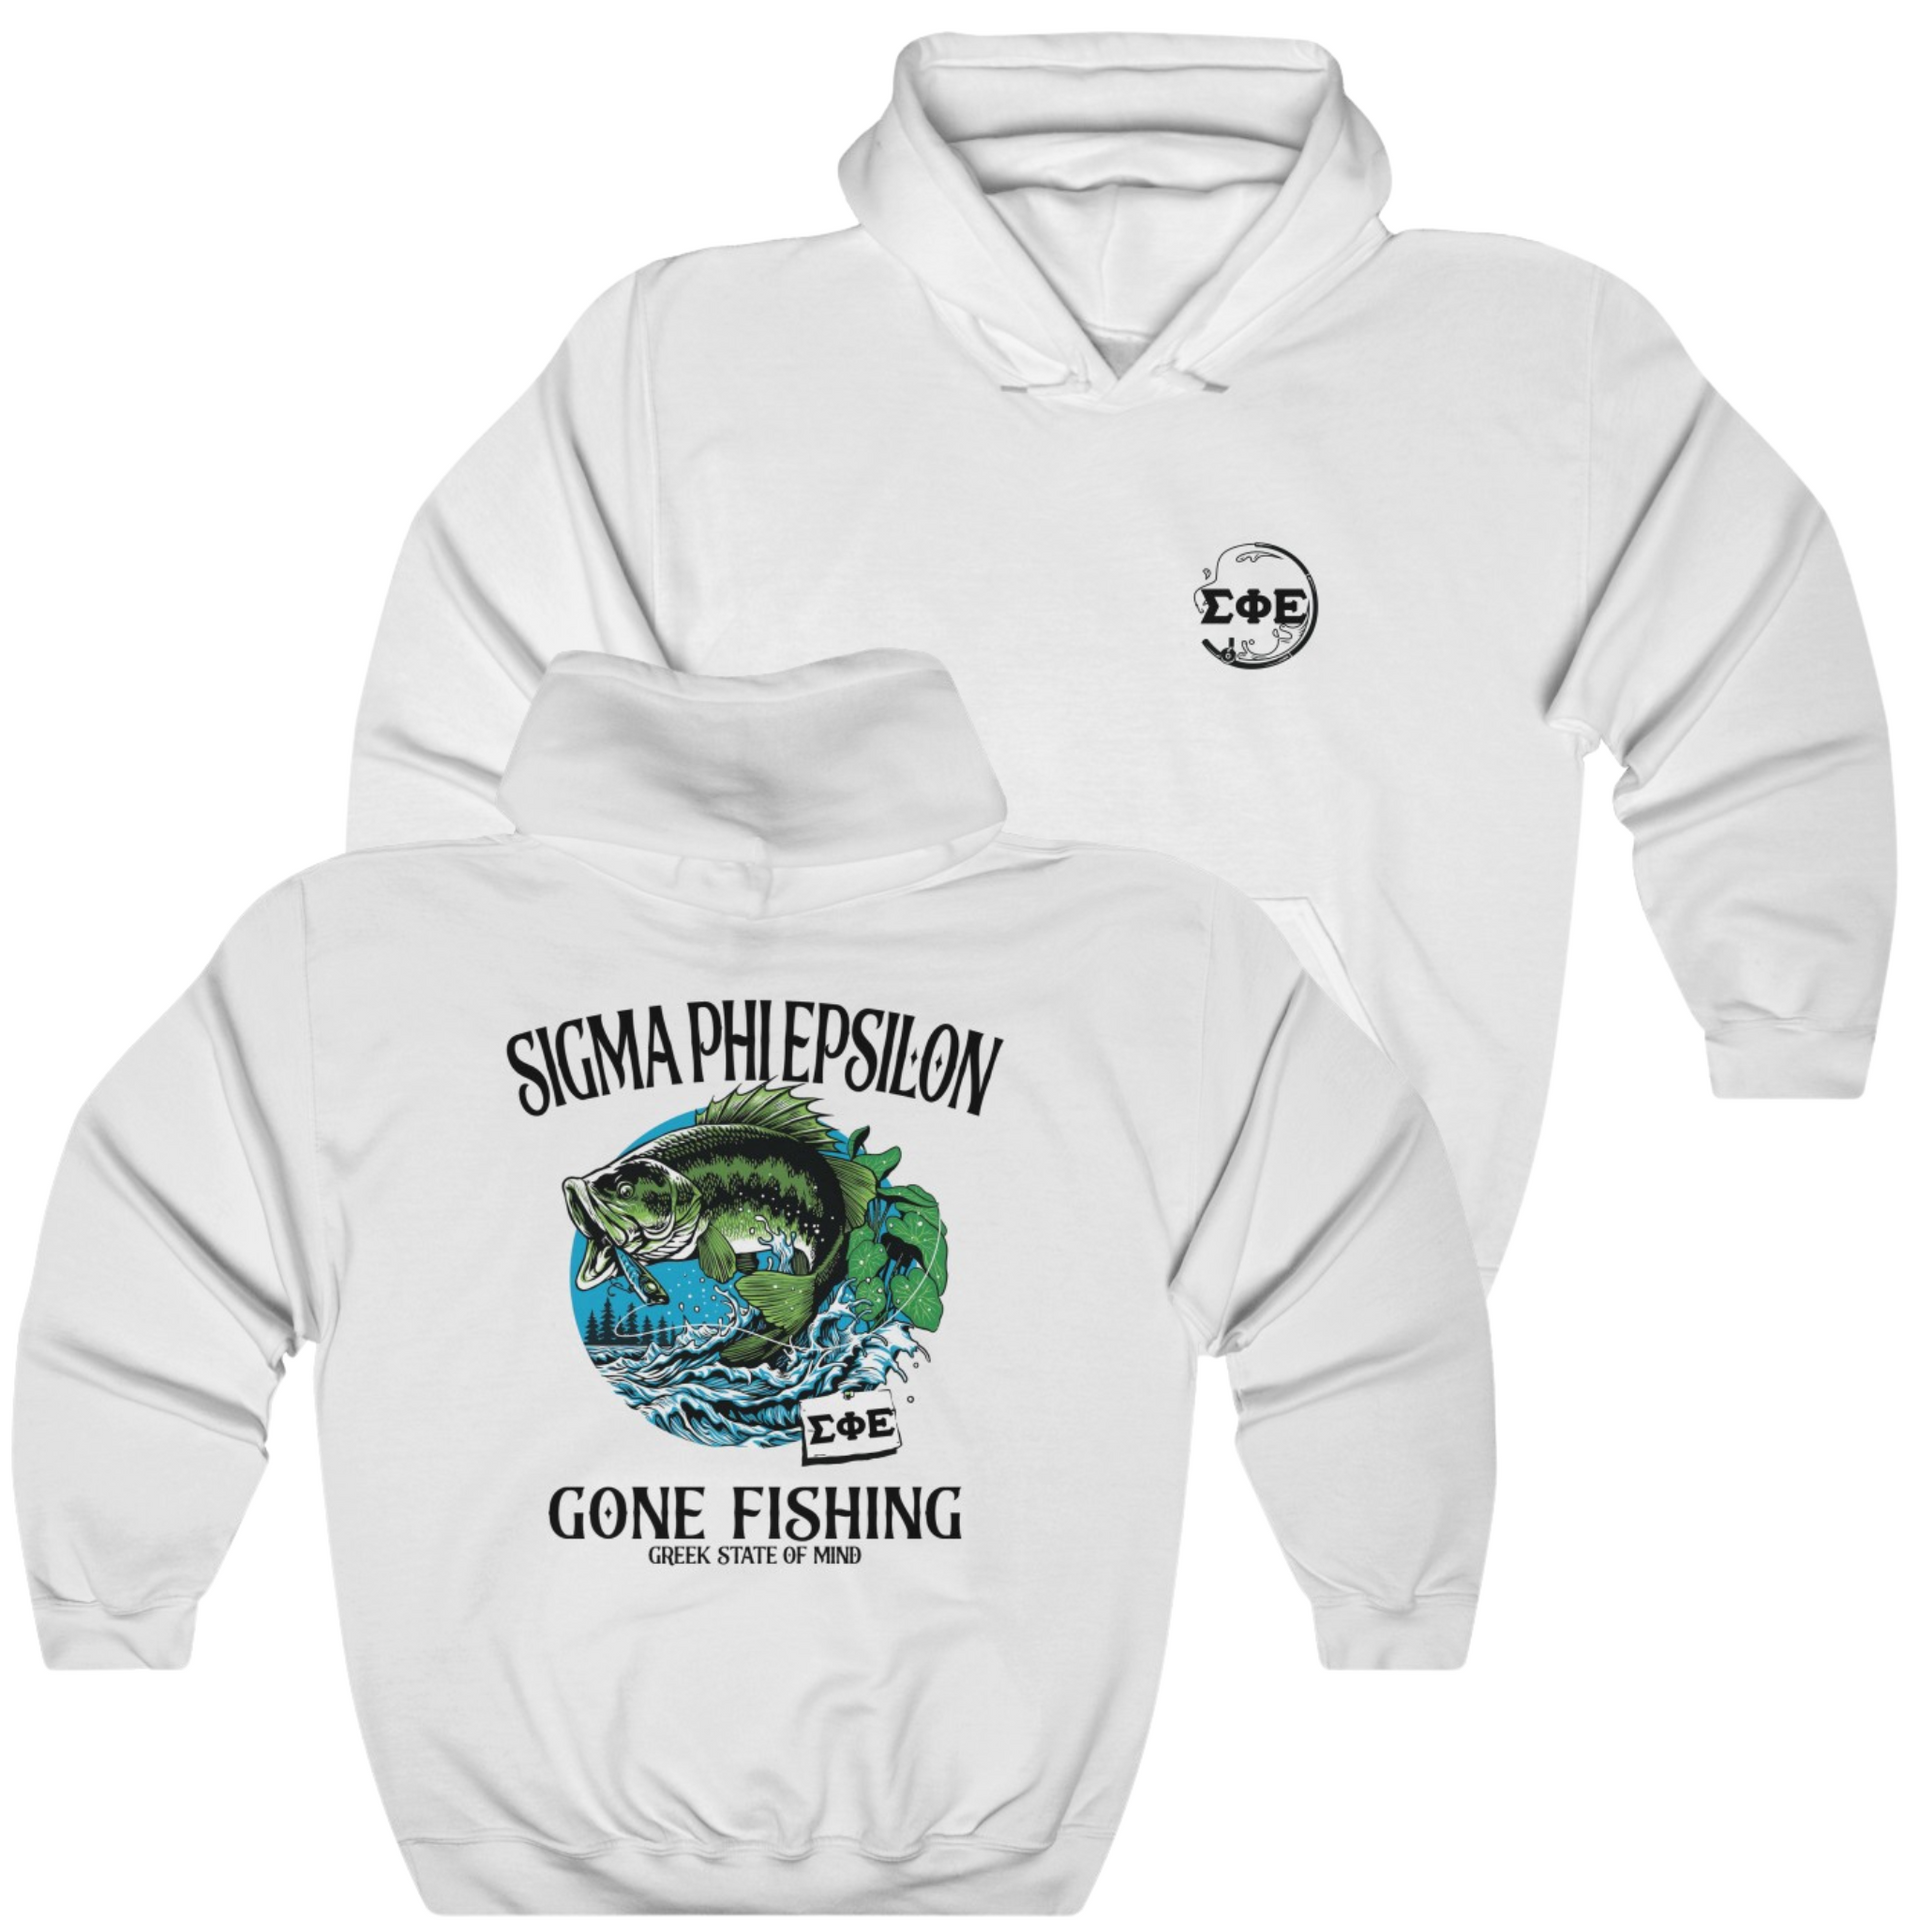 White Sigma Phi Epsilon Graphic Hoodie | Gone Fishing | SigEp Clothing - Campus Apparel